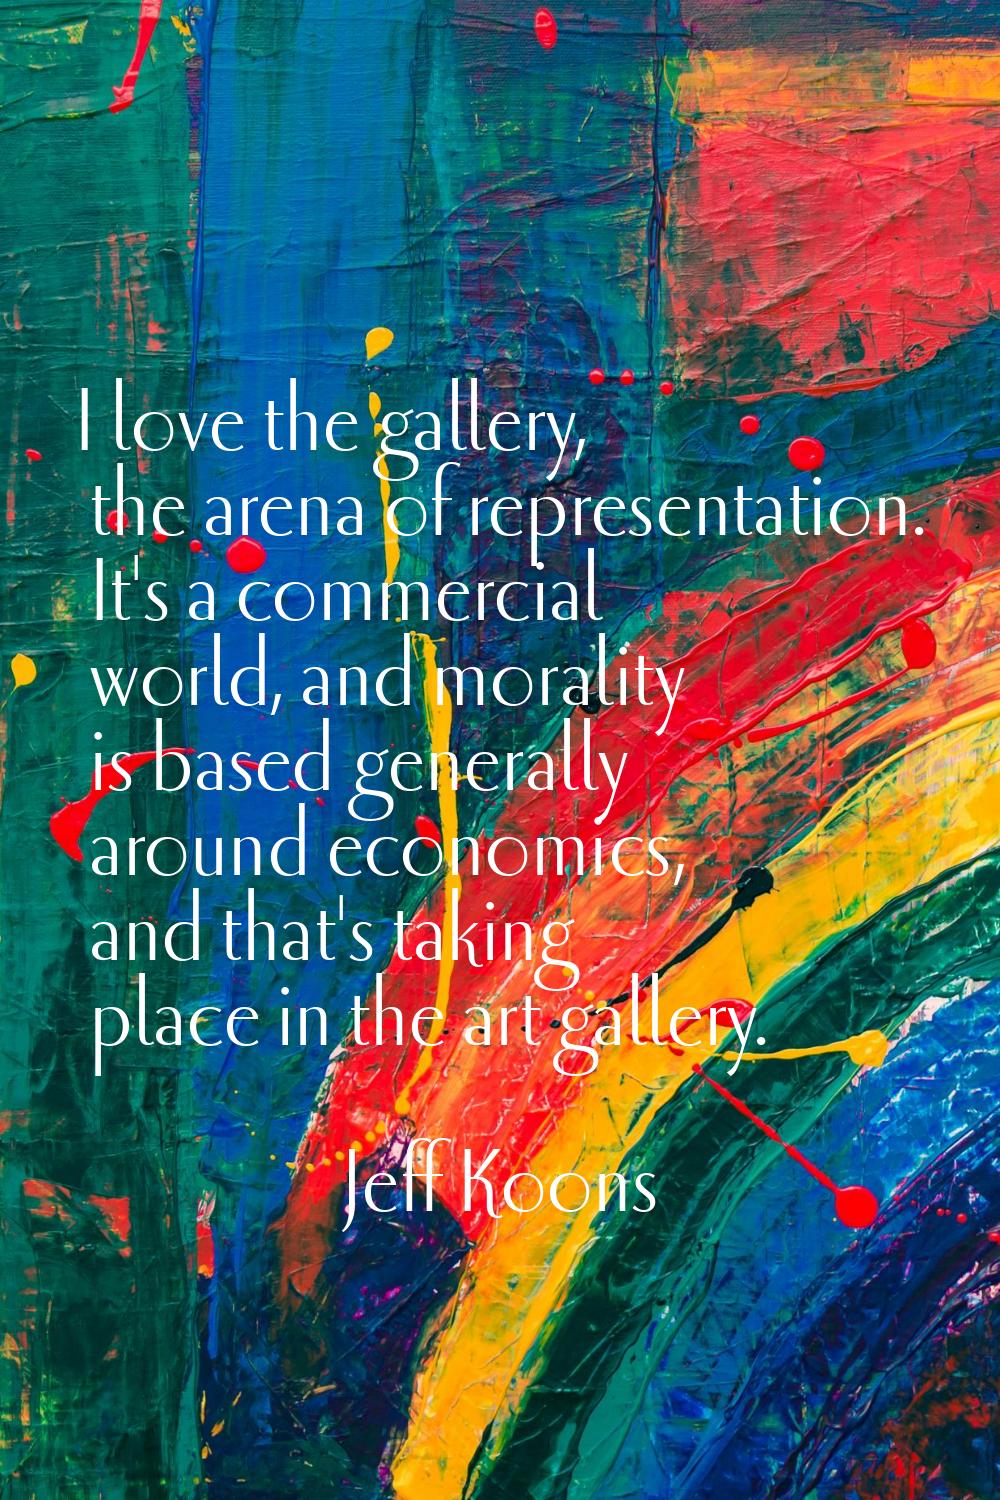 I love the gallery, the arena of representation. It's a commercial world, and morality is based gen